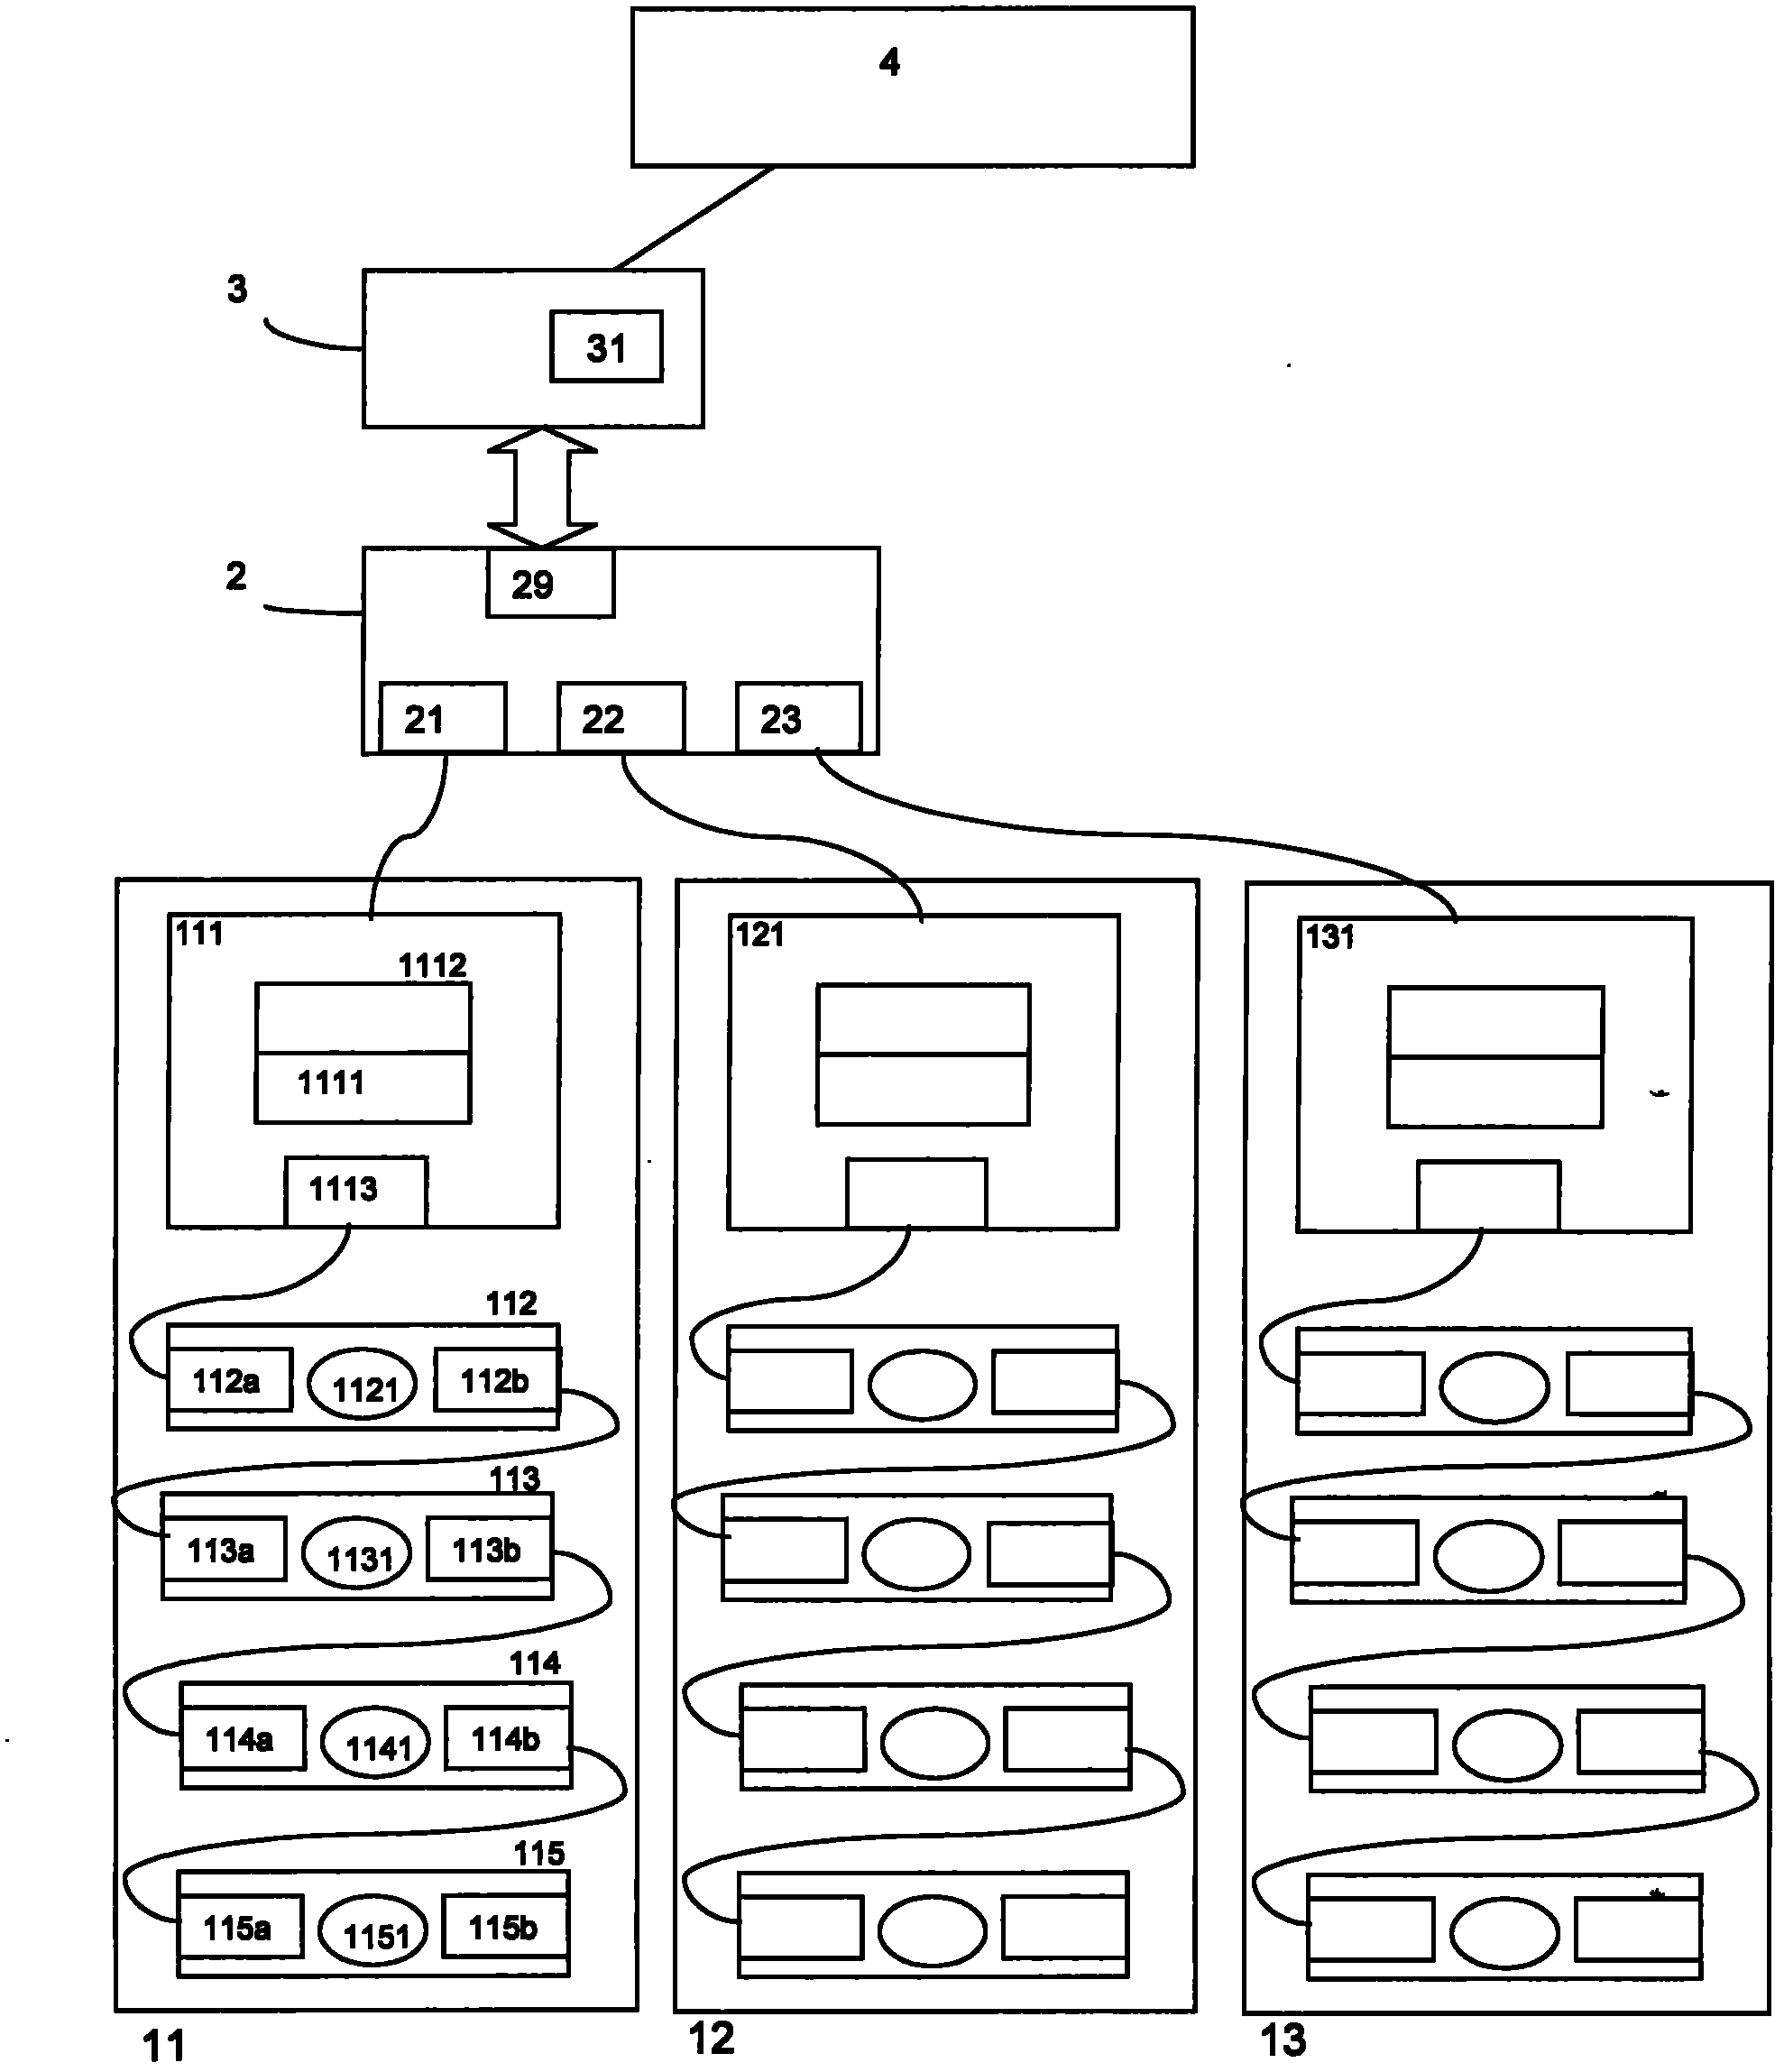 Temperature and humidity sensing networking system